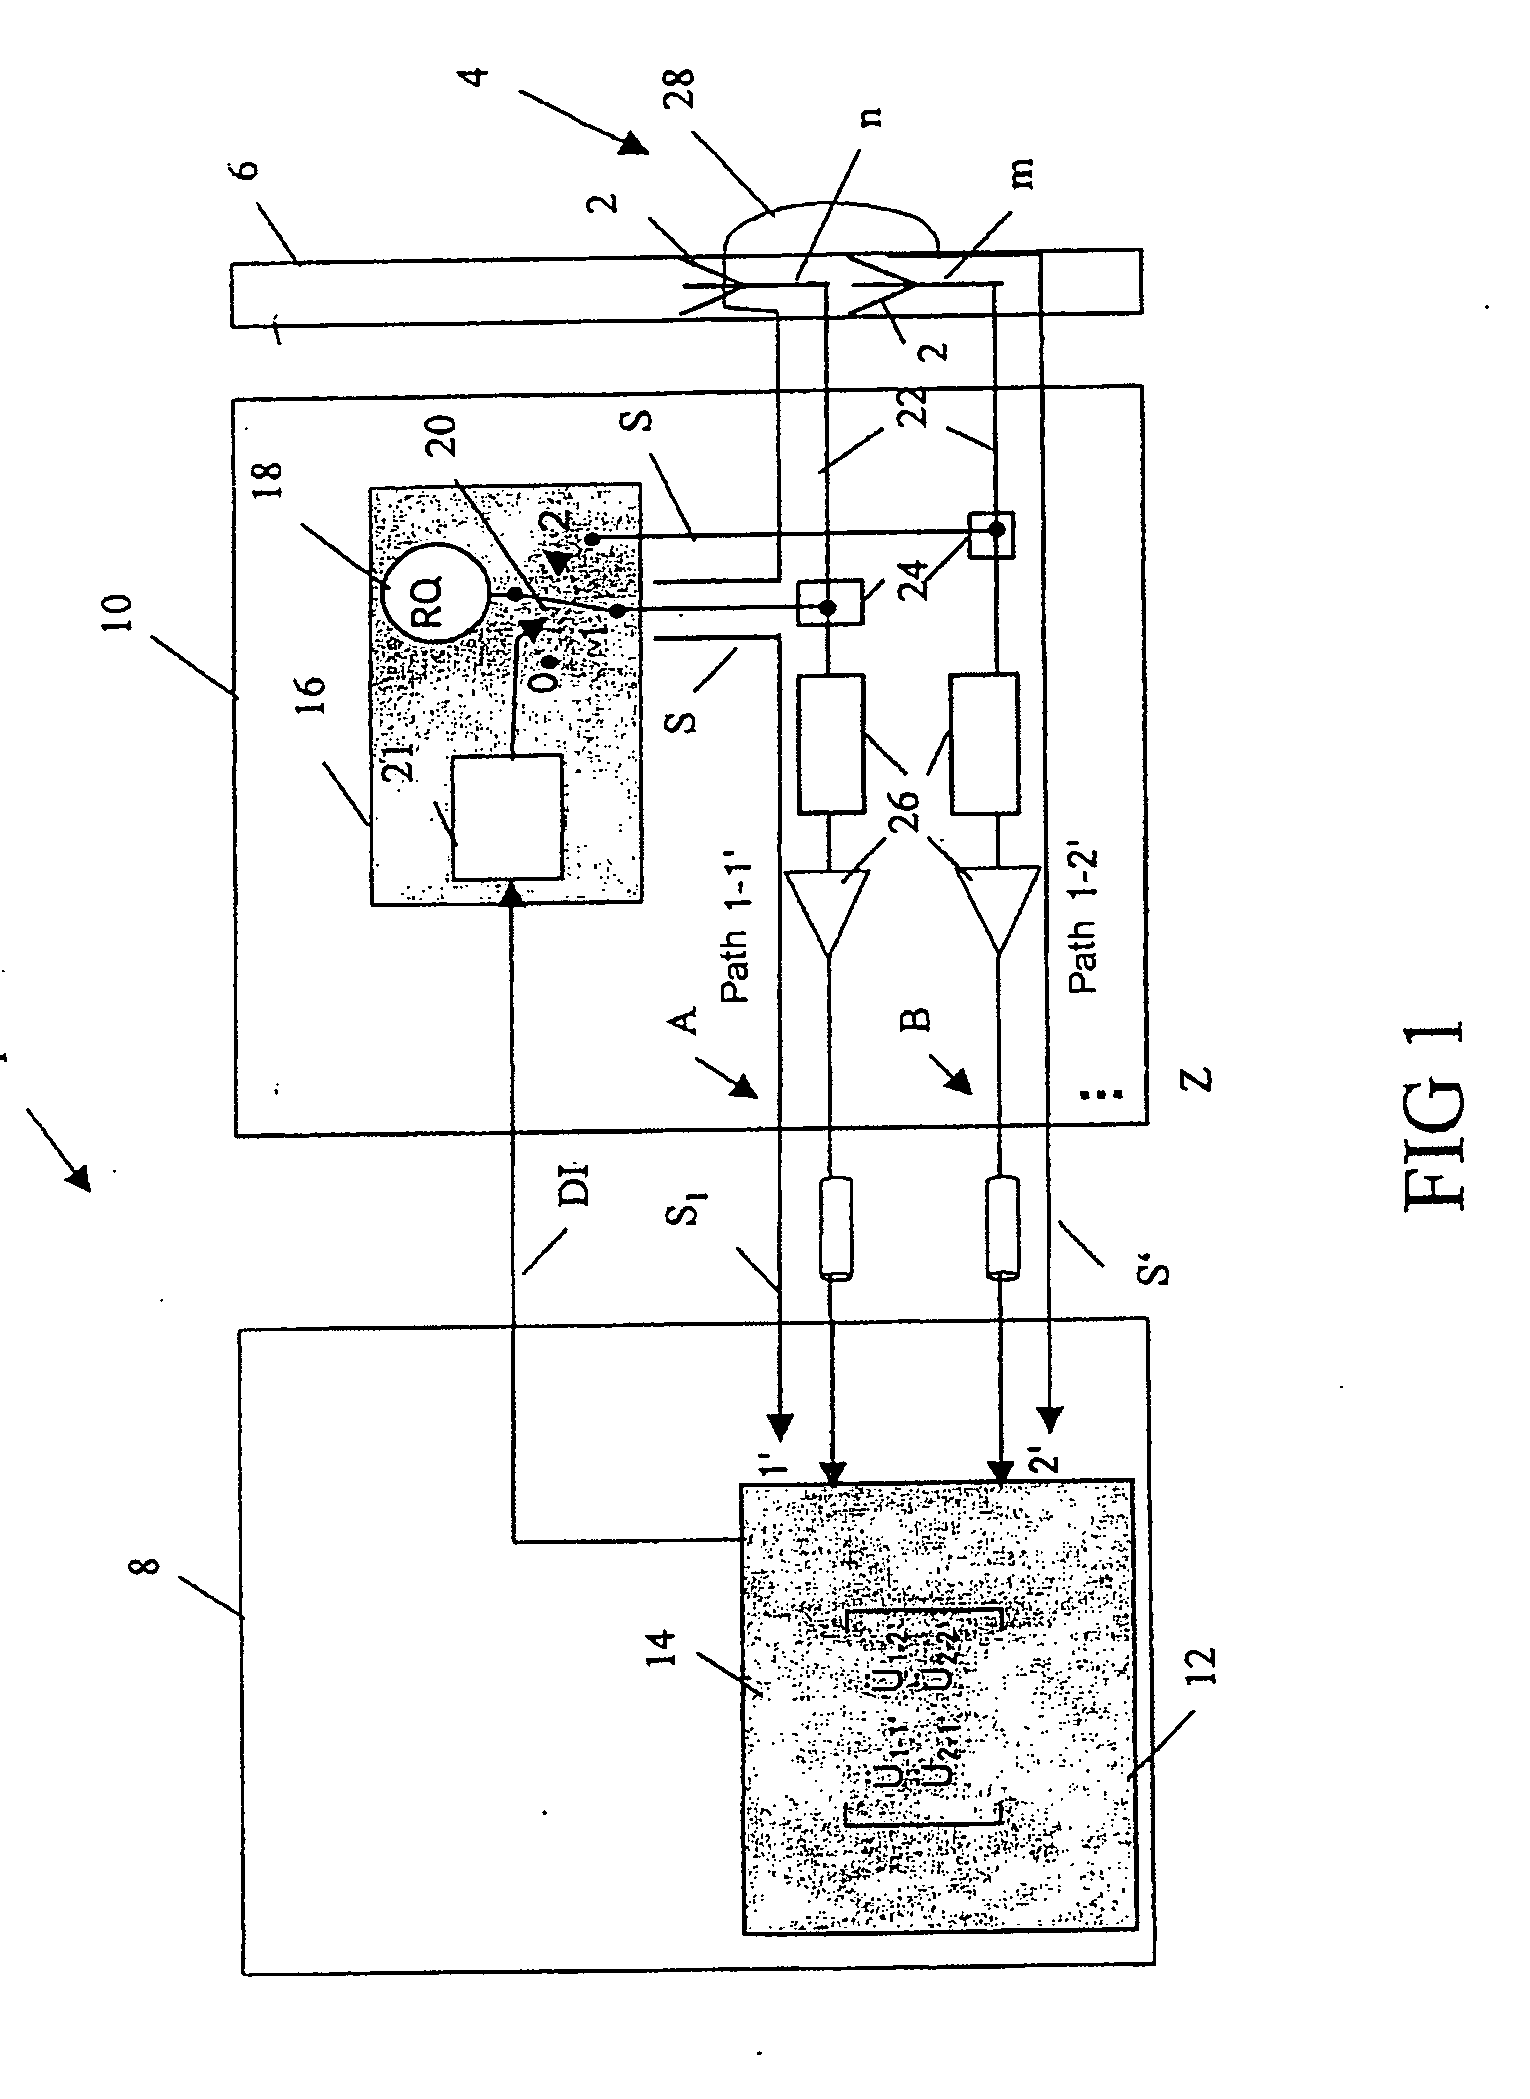 Method and system for sampling at least one antenna